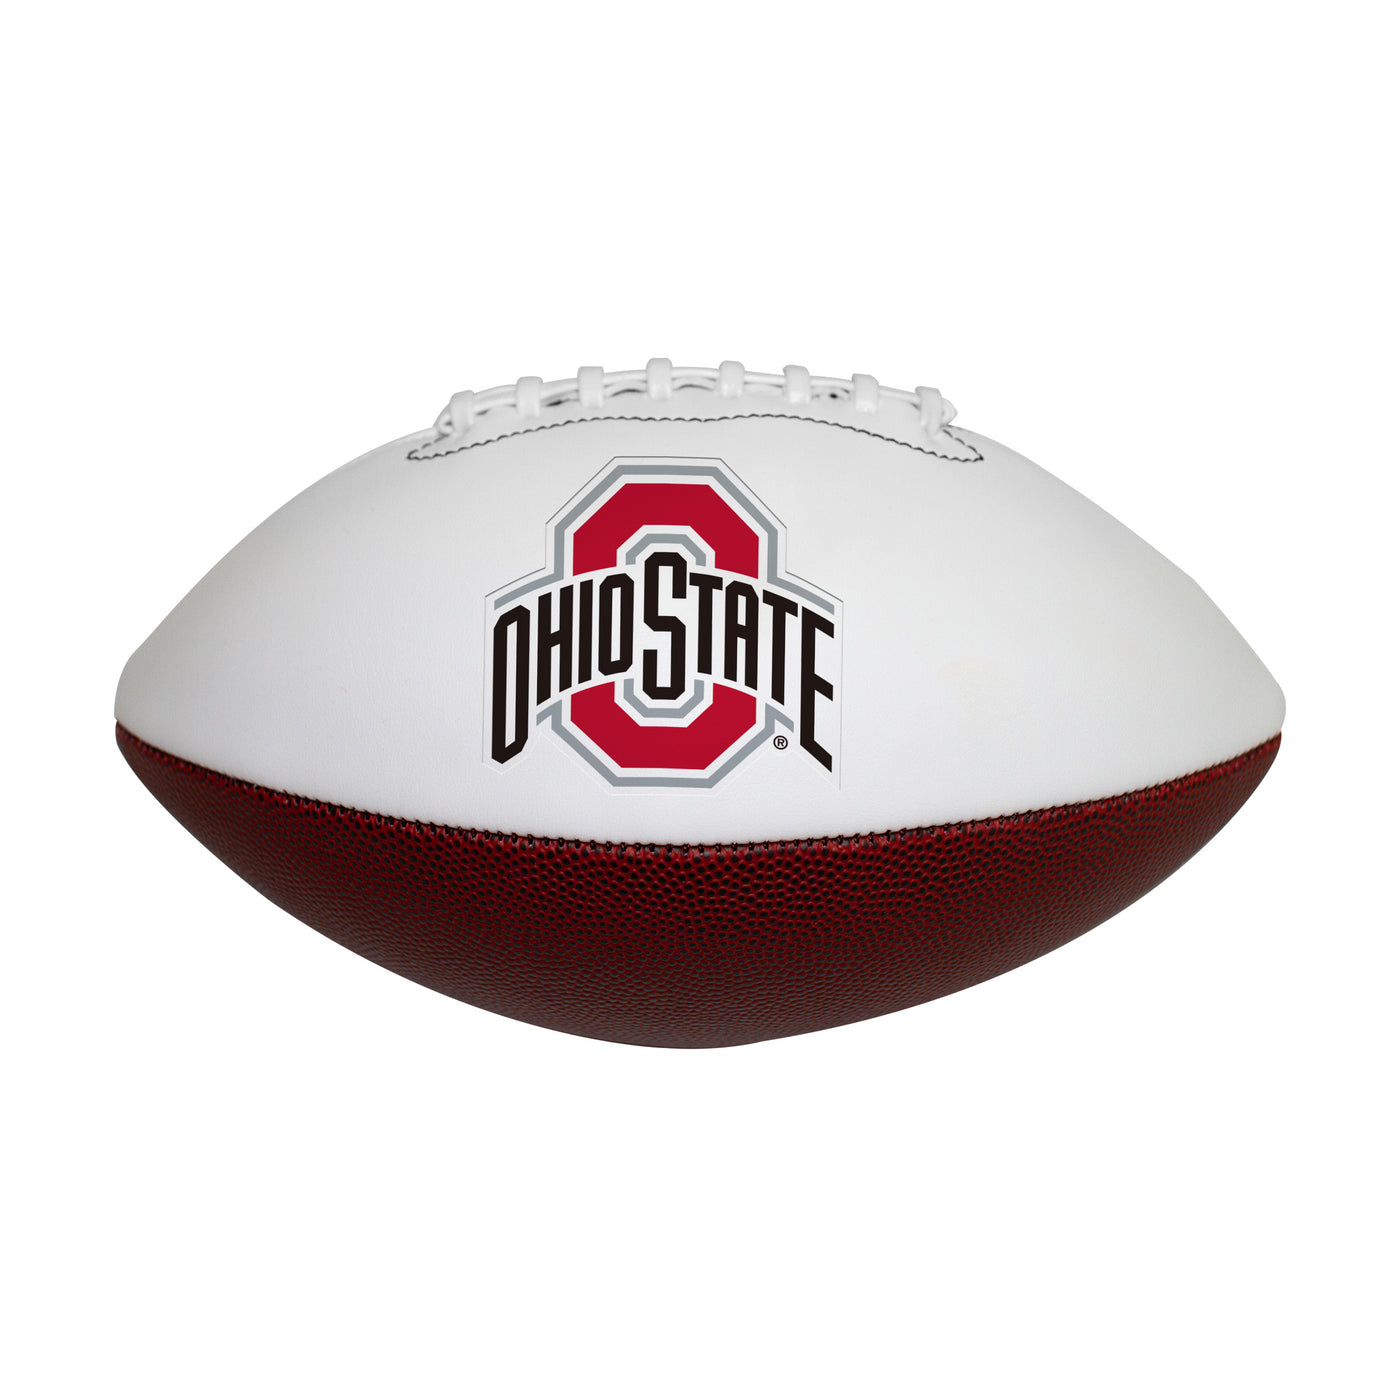 Ohio State Official-Size Autograph Football